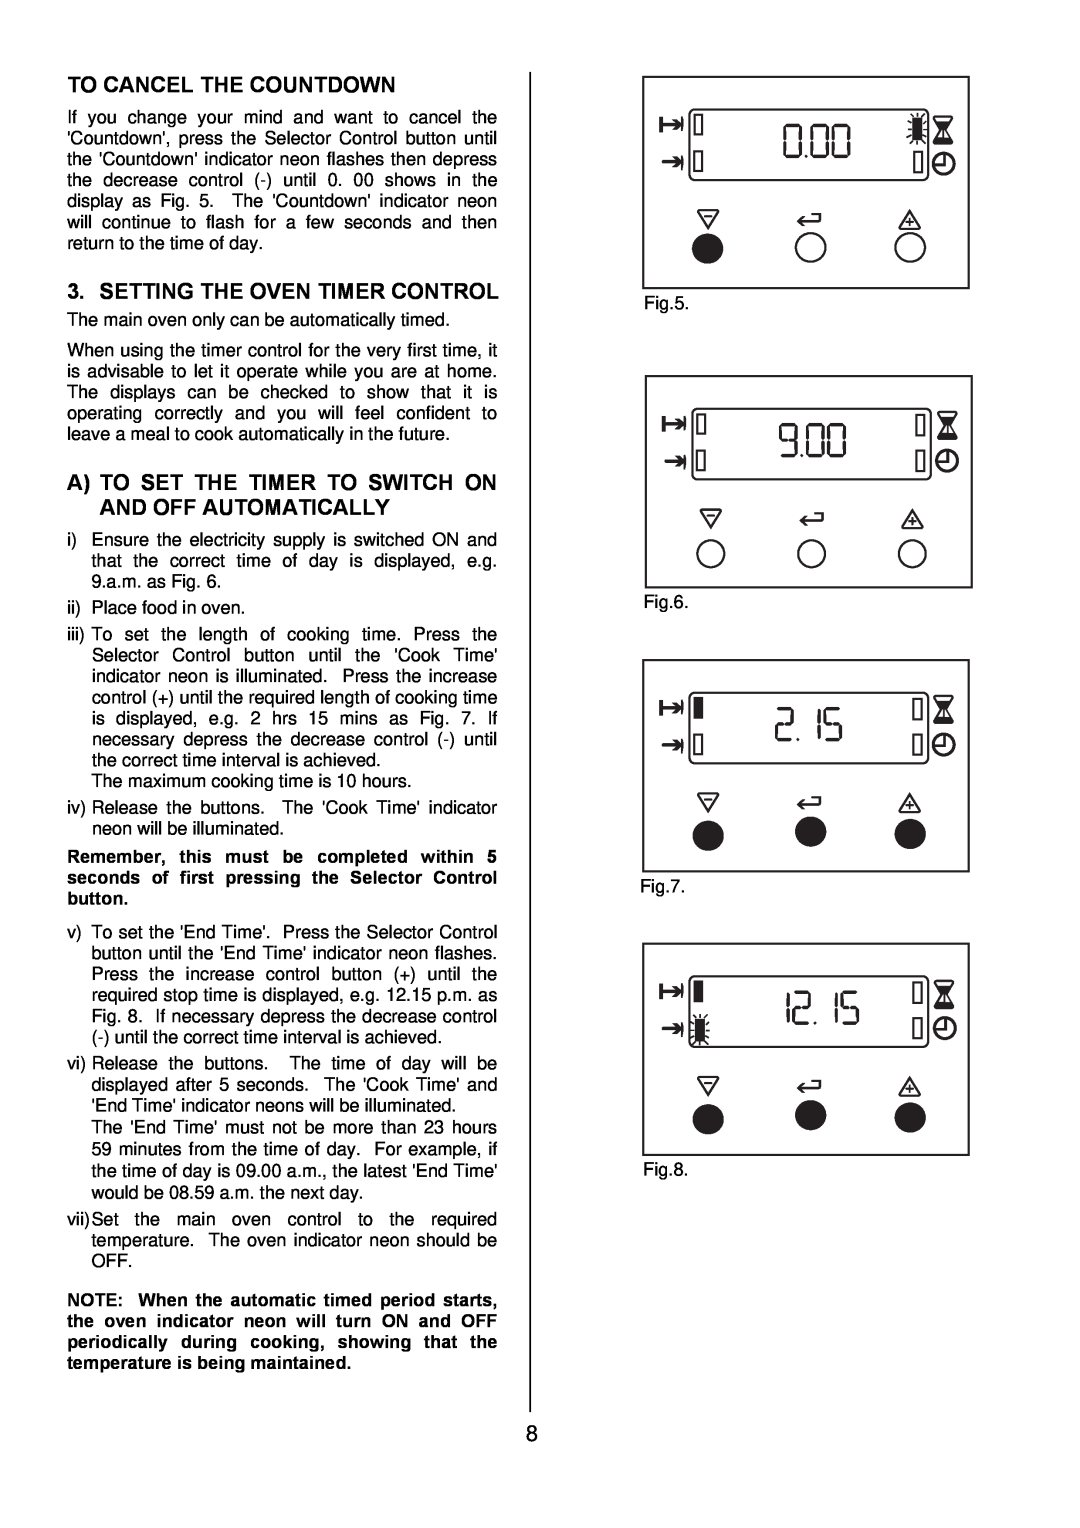 Electrolux EKC6045, EKC6044 manual To Cancel The Countdown, Setting The Oven Timer Control 